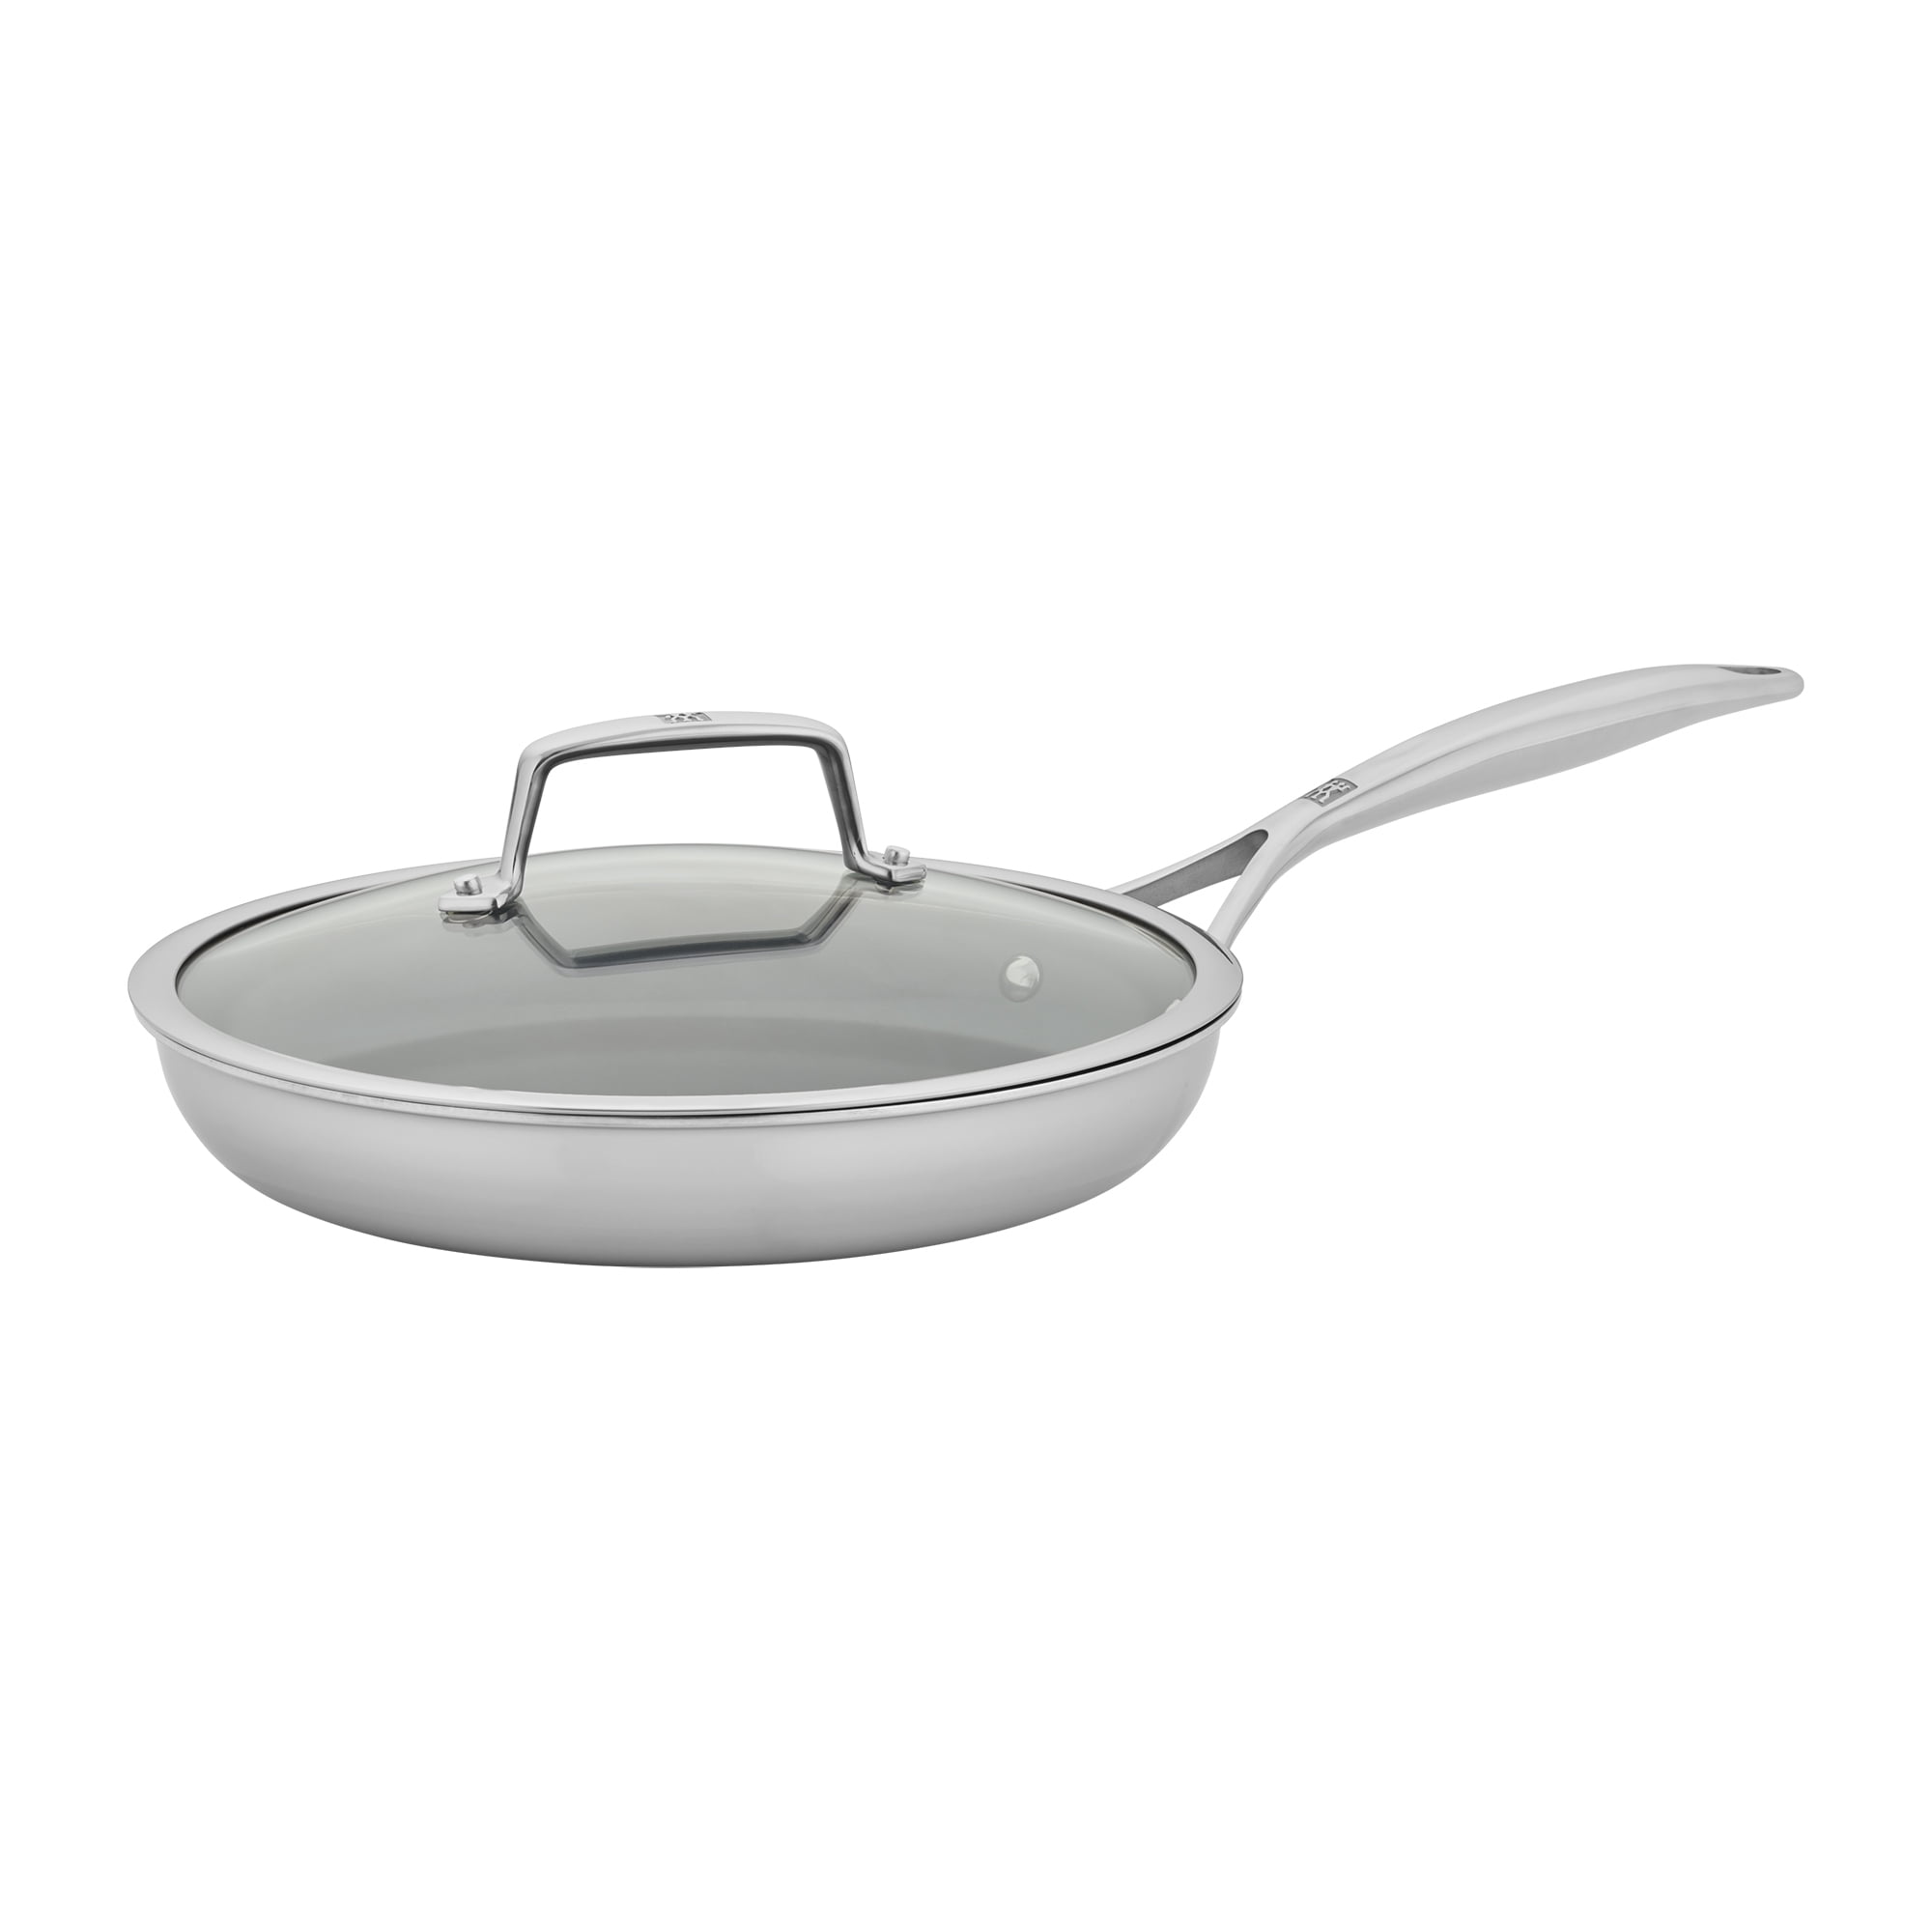 Ilinos 10 Inch Frying Pan - Non-stick Ceramic Pan with Lid for Gas and  Induction Cookers, Oven and Dishwasher Safe Frying Pan With Lid, High Heat